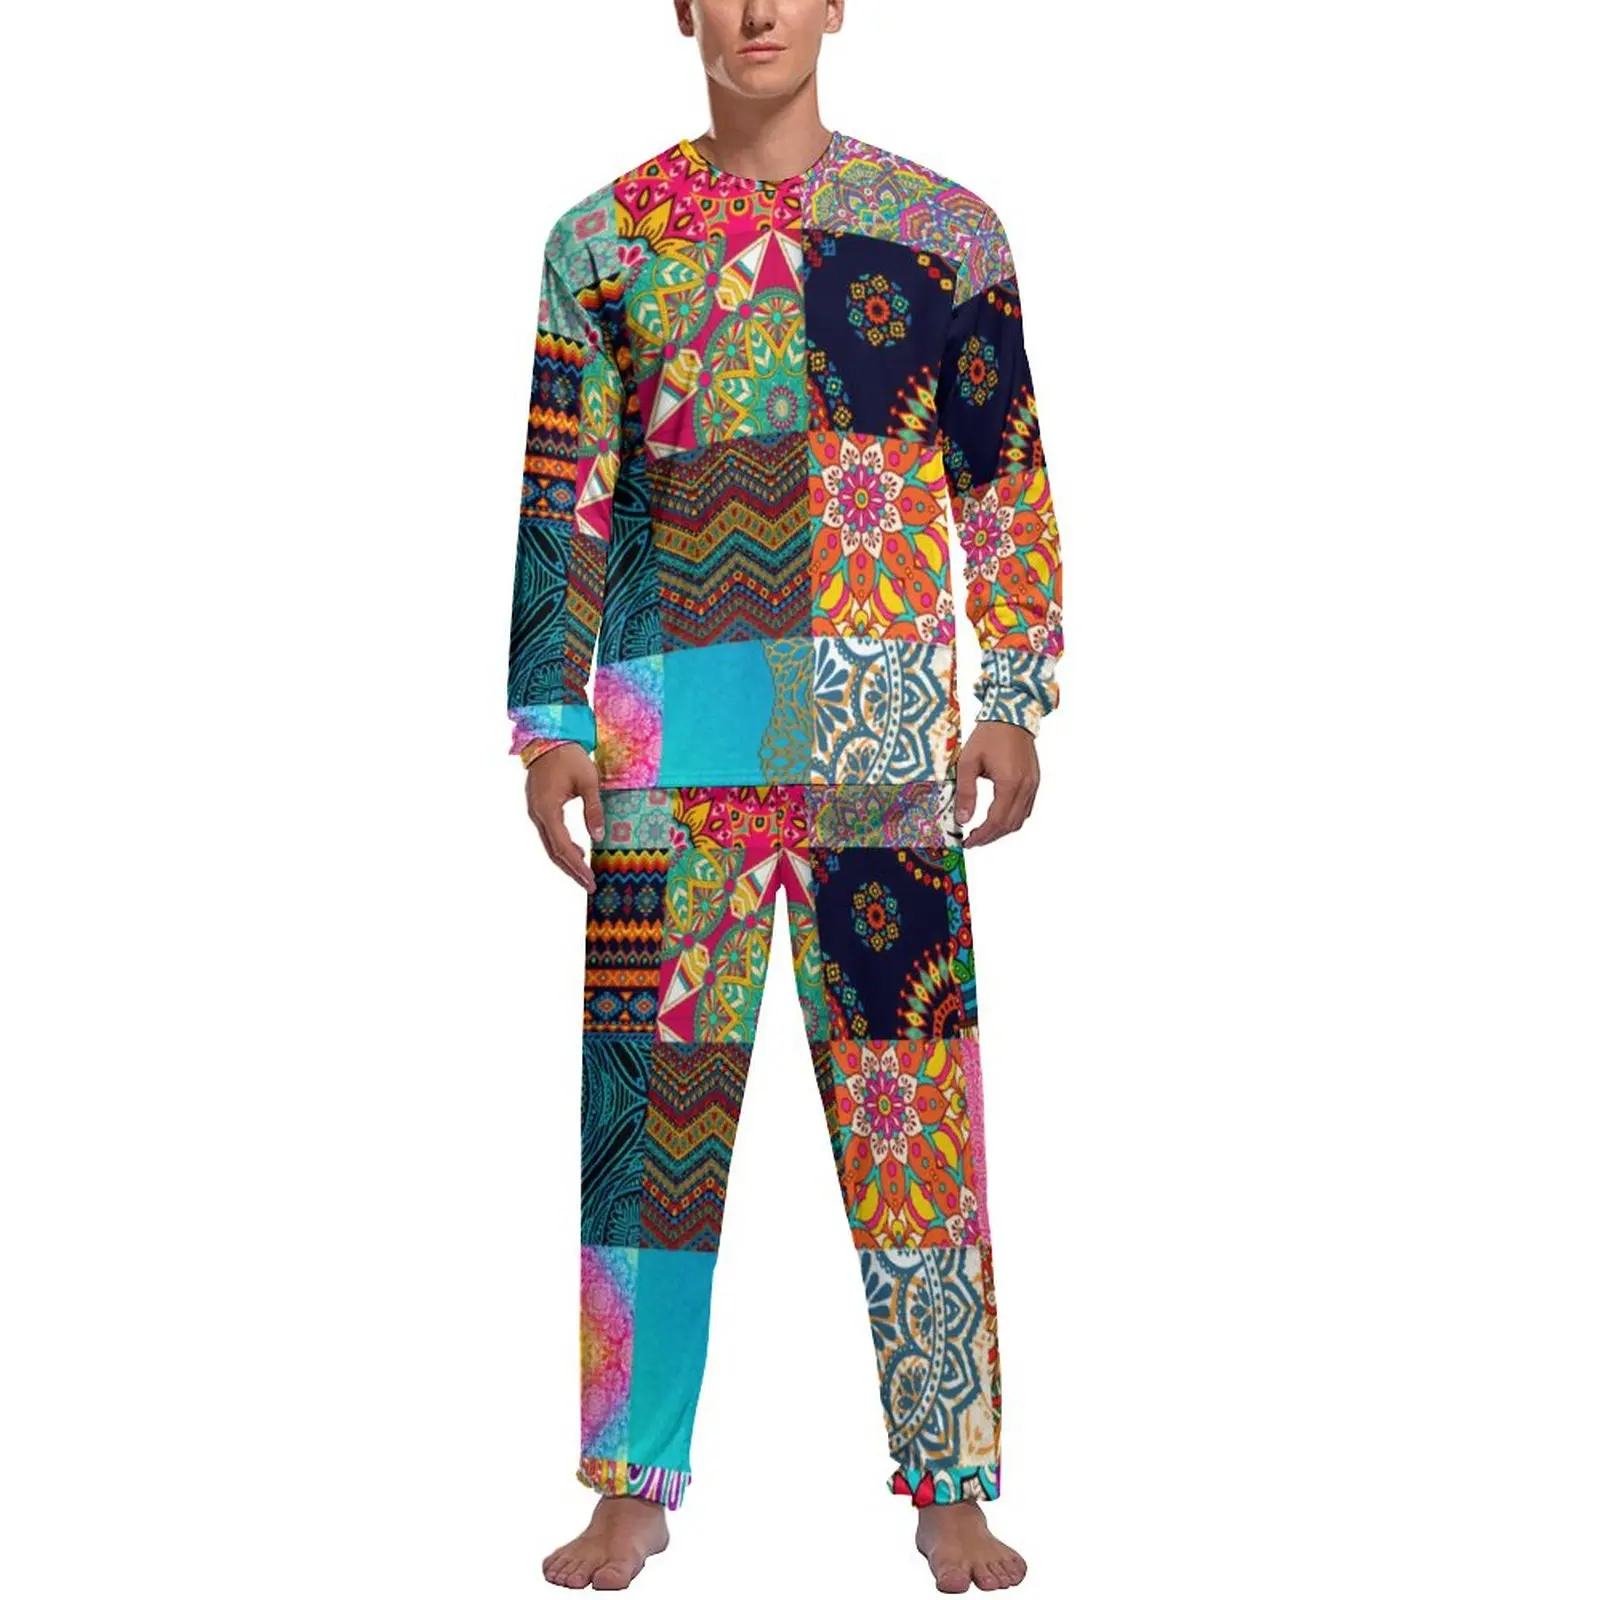 African Print Pajamas Autumn 2 Pieces Patchwork Colorful Soft Pajama Sets Man Long Sleeves Casual Graphic Sleepwear